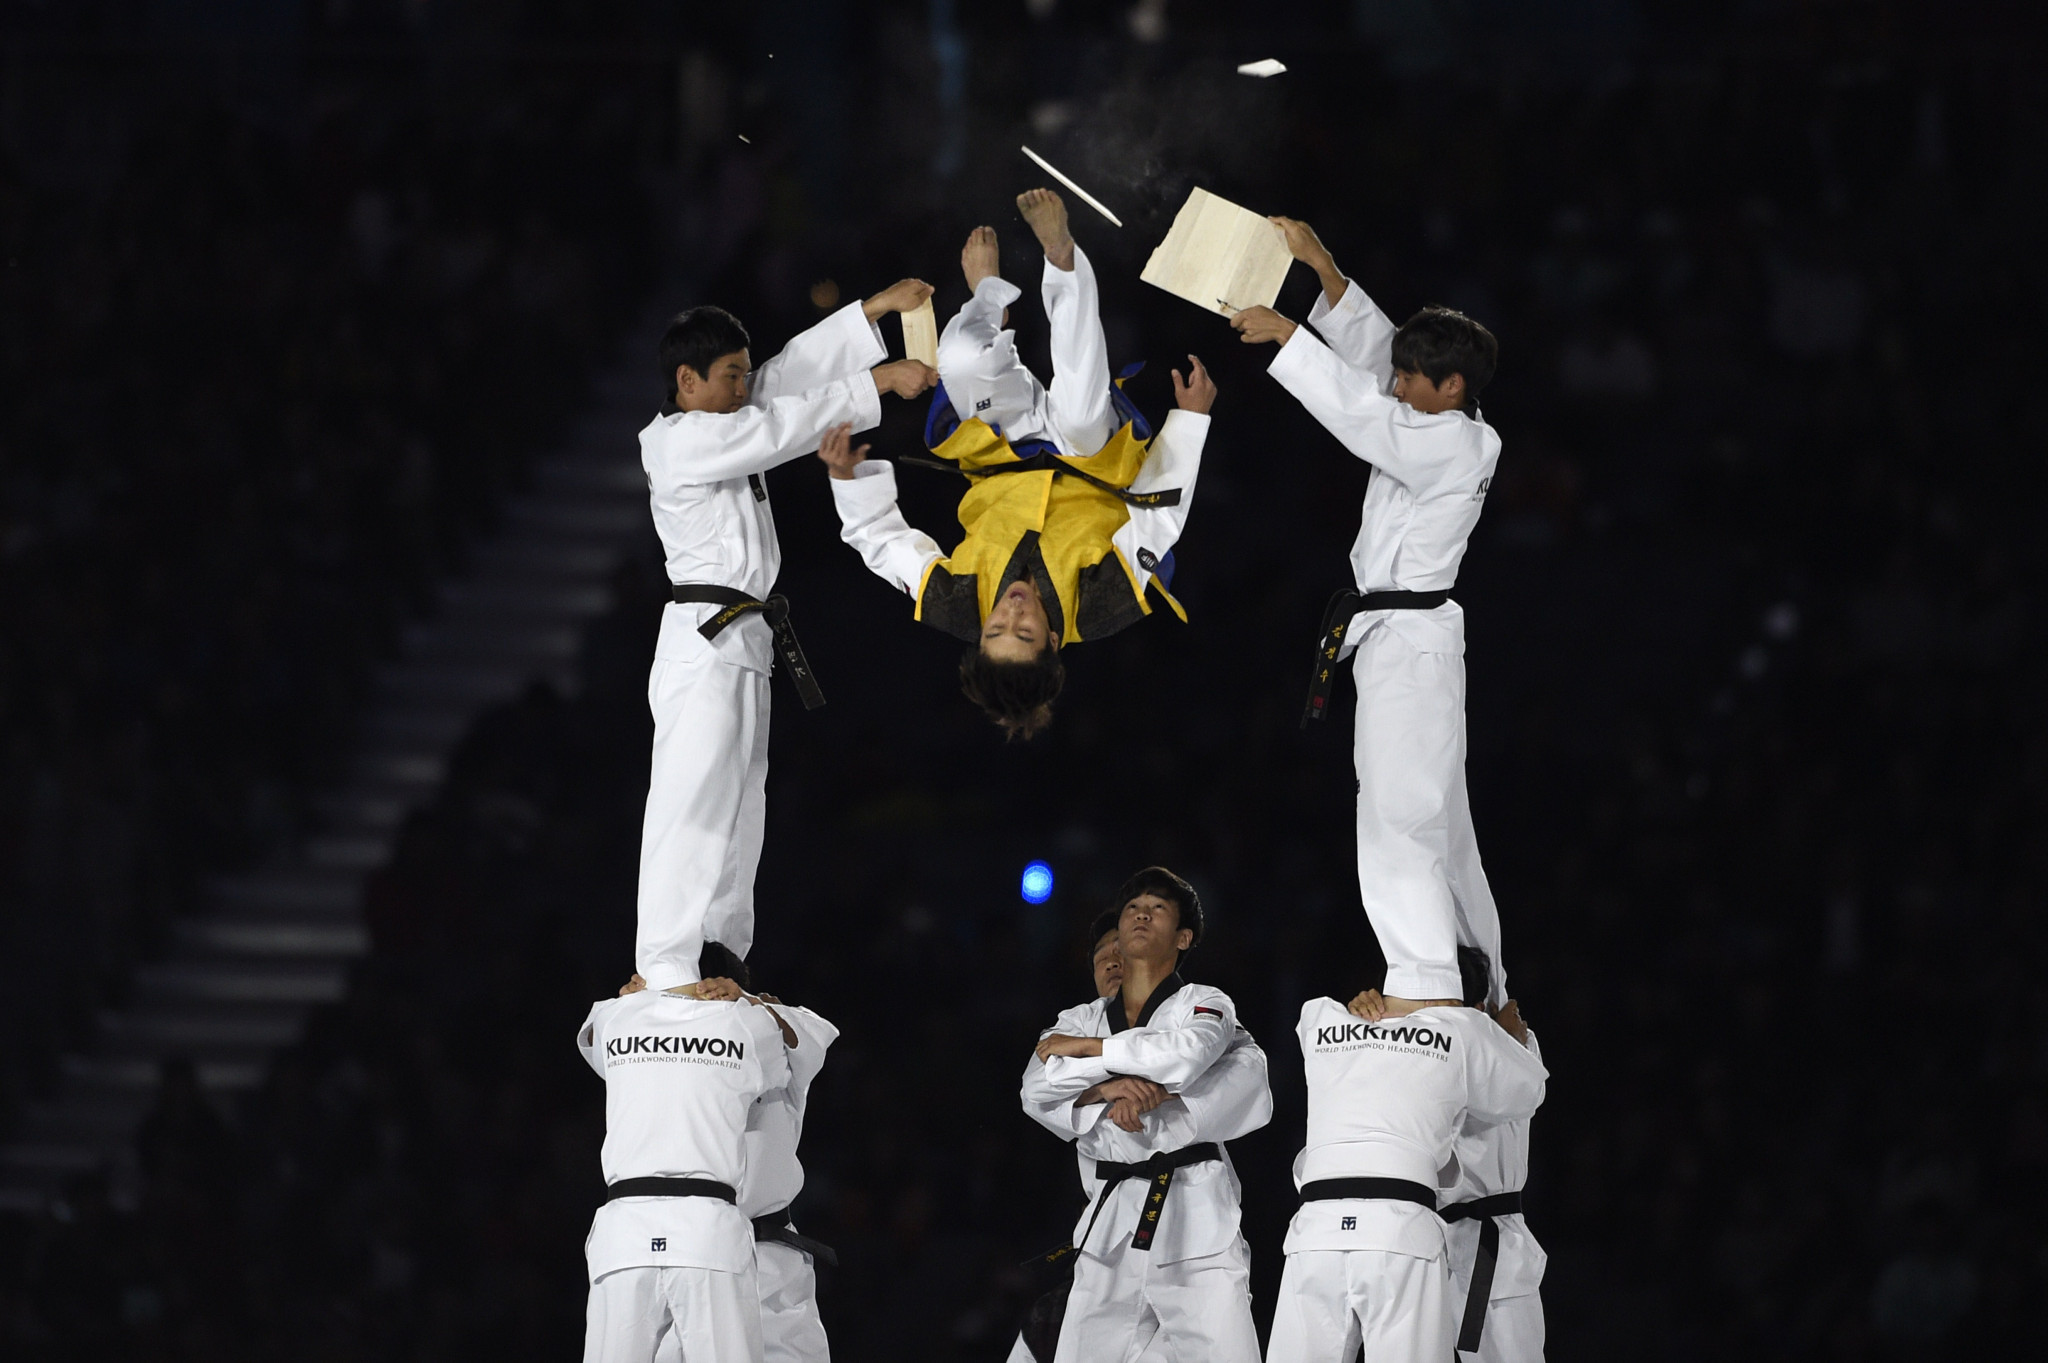 Members from the Kukkiwon Taekwondo headquarters performed at the closing ceremony of the 2014 Asian Games in Incheon in South Korea ©Getty Images 